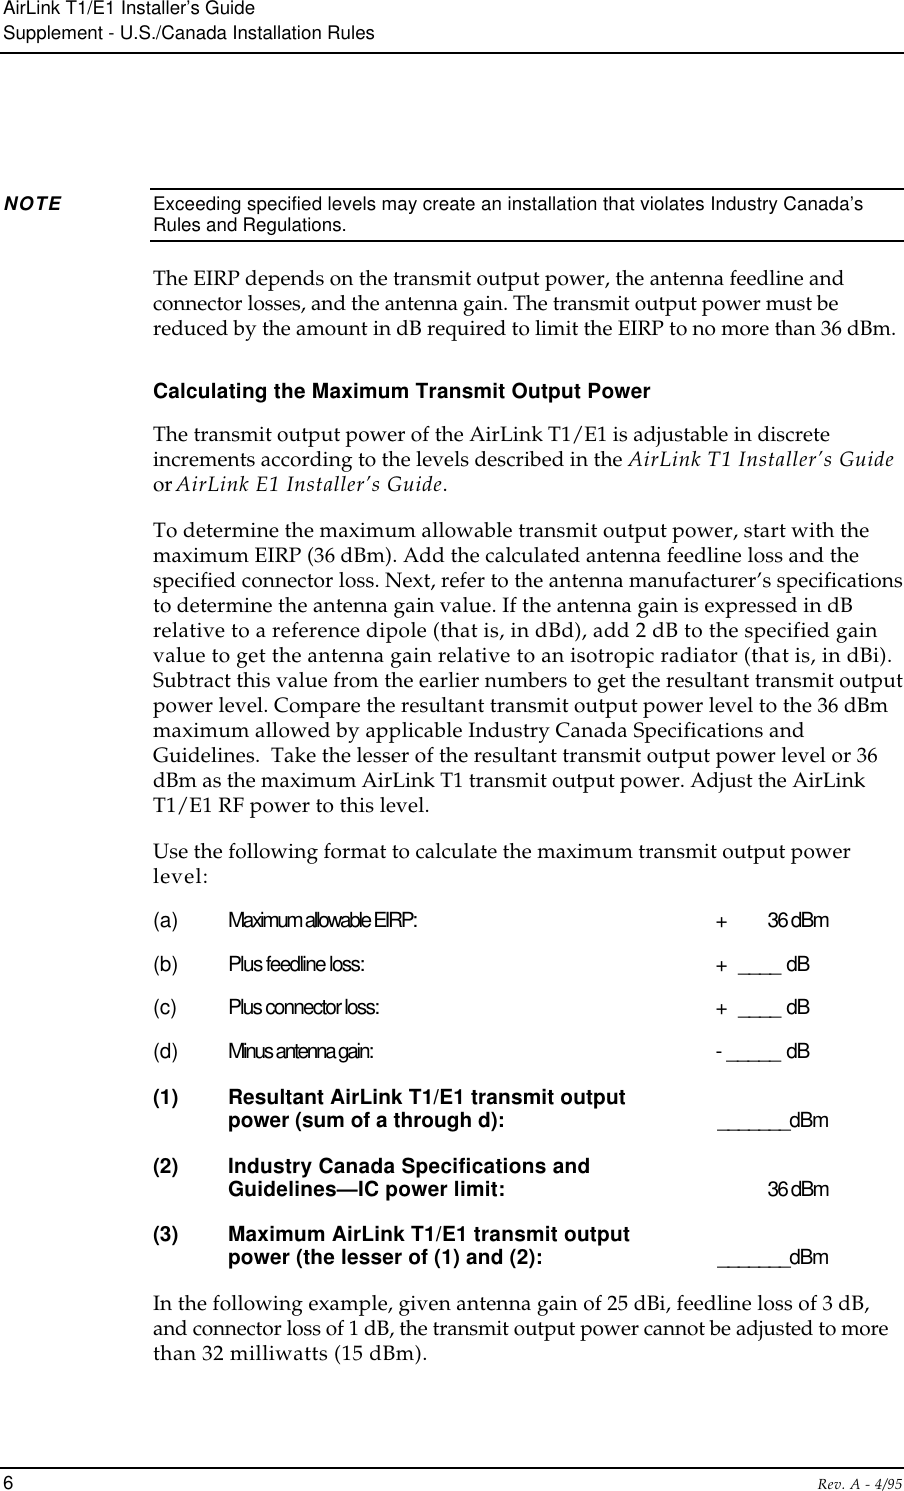 AirLink T1/E1 Installer’s GuideSupplement - U.S./Canada Installation Rules6Rev. A - 4/95NOTE Exceeding specified levels may create an installation that violates Industry Canada’sRules and Regulations.The EIRP depends on the transmit output power, the antenna feedline andconnector losses, and the antenna gain. The transmit output power must bereduced by the amount in dB required to limit the EIRP to no more than 36 dBm.Calculating the Maximum Transmit Output PowerThe transmit output power of the AirLink T1/E1 is adjustable in discreteincrements according to the levels described in the AirLink T1 Installer’s Guideor AirLink E1 Installer’s Guide.To determine the maximum allowable transmit output power, start with themaximum EIRP (36 dBm). Add the calculated antenna feedline loss and thespecified connector loss. Next, refer to the antenna manufacturer’s specificationsto determine the antenna gain value. If the antenna gain is expressed in dBrelative to a reference dipole (that is, in dBd), add 2 dB to the specified gainvalue to get the antenna gain relative to an isotropic radiator (that is, in dBi).Subtract this value from the earlier numbers to get the resultant transmit outputpower level. Compare the resultant transmit output power level to the 36 dBmmaximum allowed by applicable Industry Canada Specifications andGuidelines.  Take the lesser of the resultant transmit output power level or 36dBm as the maximum AirLink T1 transmit output power. Adjust the AirLinkT1/E1 RF power to this level.Use the following format to calculate the maximum transmit output powerlevel:(a) Maximum allowable EIRP: +  36 dBm(b) Plus feedline loss: +  ____ dB(c) Plus connector loss: +  ____ dB(d) Minus antenna gain: - _____ dB(1) Resultant AirLink T1/E1 transmit outputpower (sum of a through d): _______dBm(2) Industry Canada Specifications andGuidelines—IC power limit: 36 dBm(3) Maximum AirLink T1/E1 transmit outputpower (the lesser of (1) and (2): _______dBmIn the following example, given antenna gain of 25 dBi, feedline loss of 3 dB,and connector loss of 1 dB, the transmit output power cannot be adjusted to morethan 32 milliwatts (15 dBm).